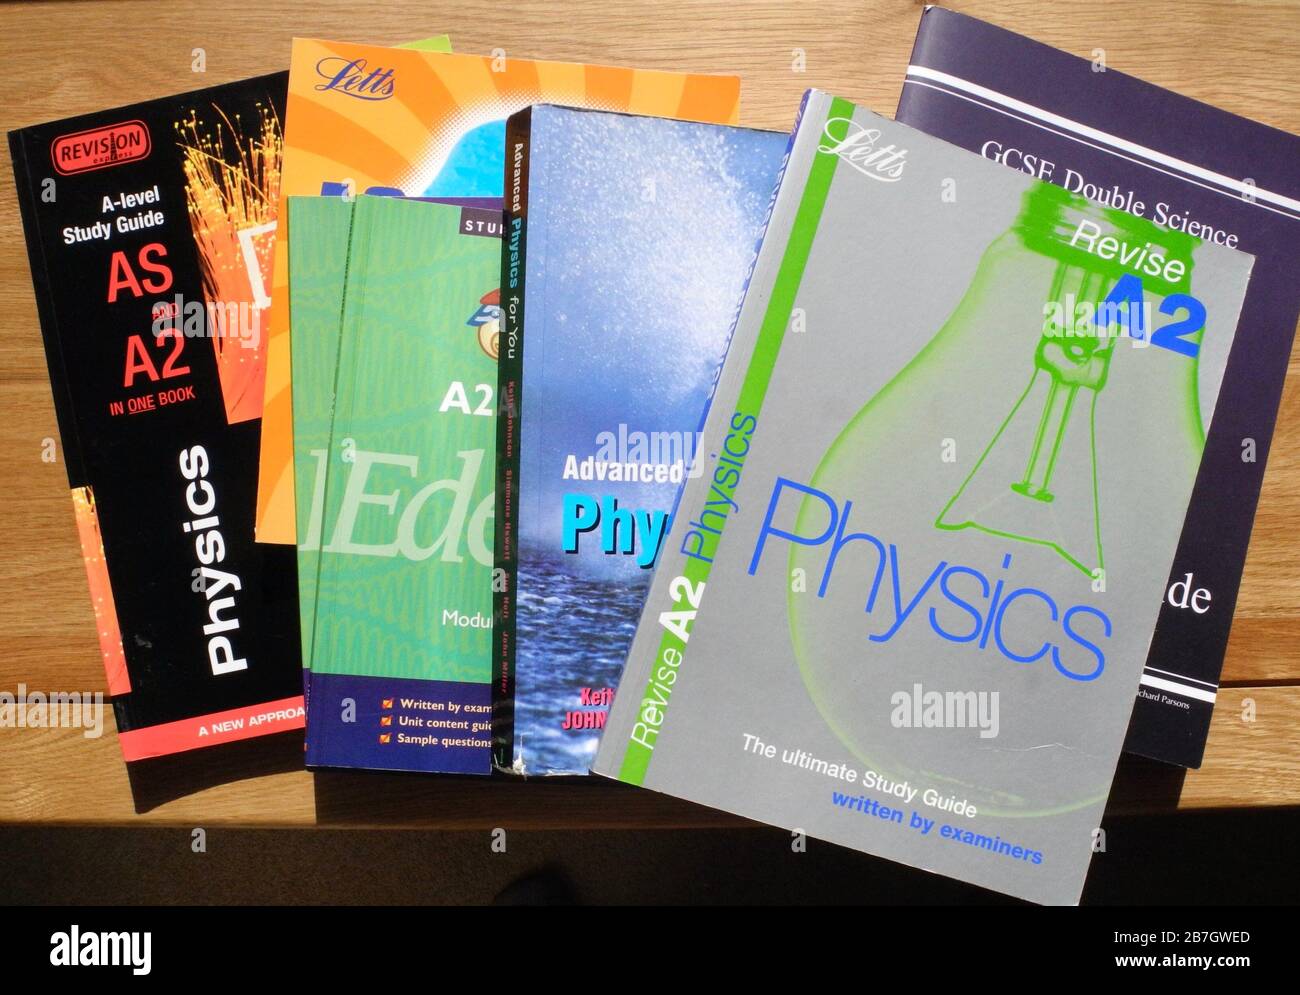 Student Revision aids for A-level students in Mathematics, Physics and Design and Technology Stock Photo